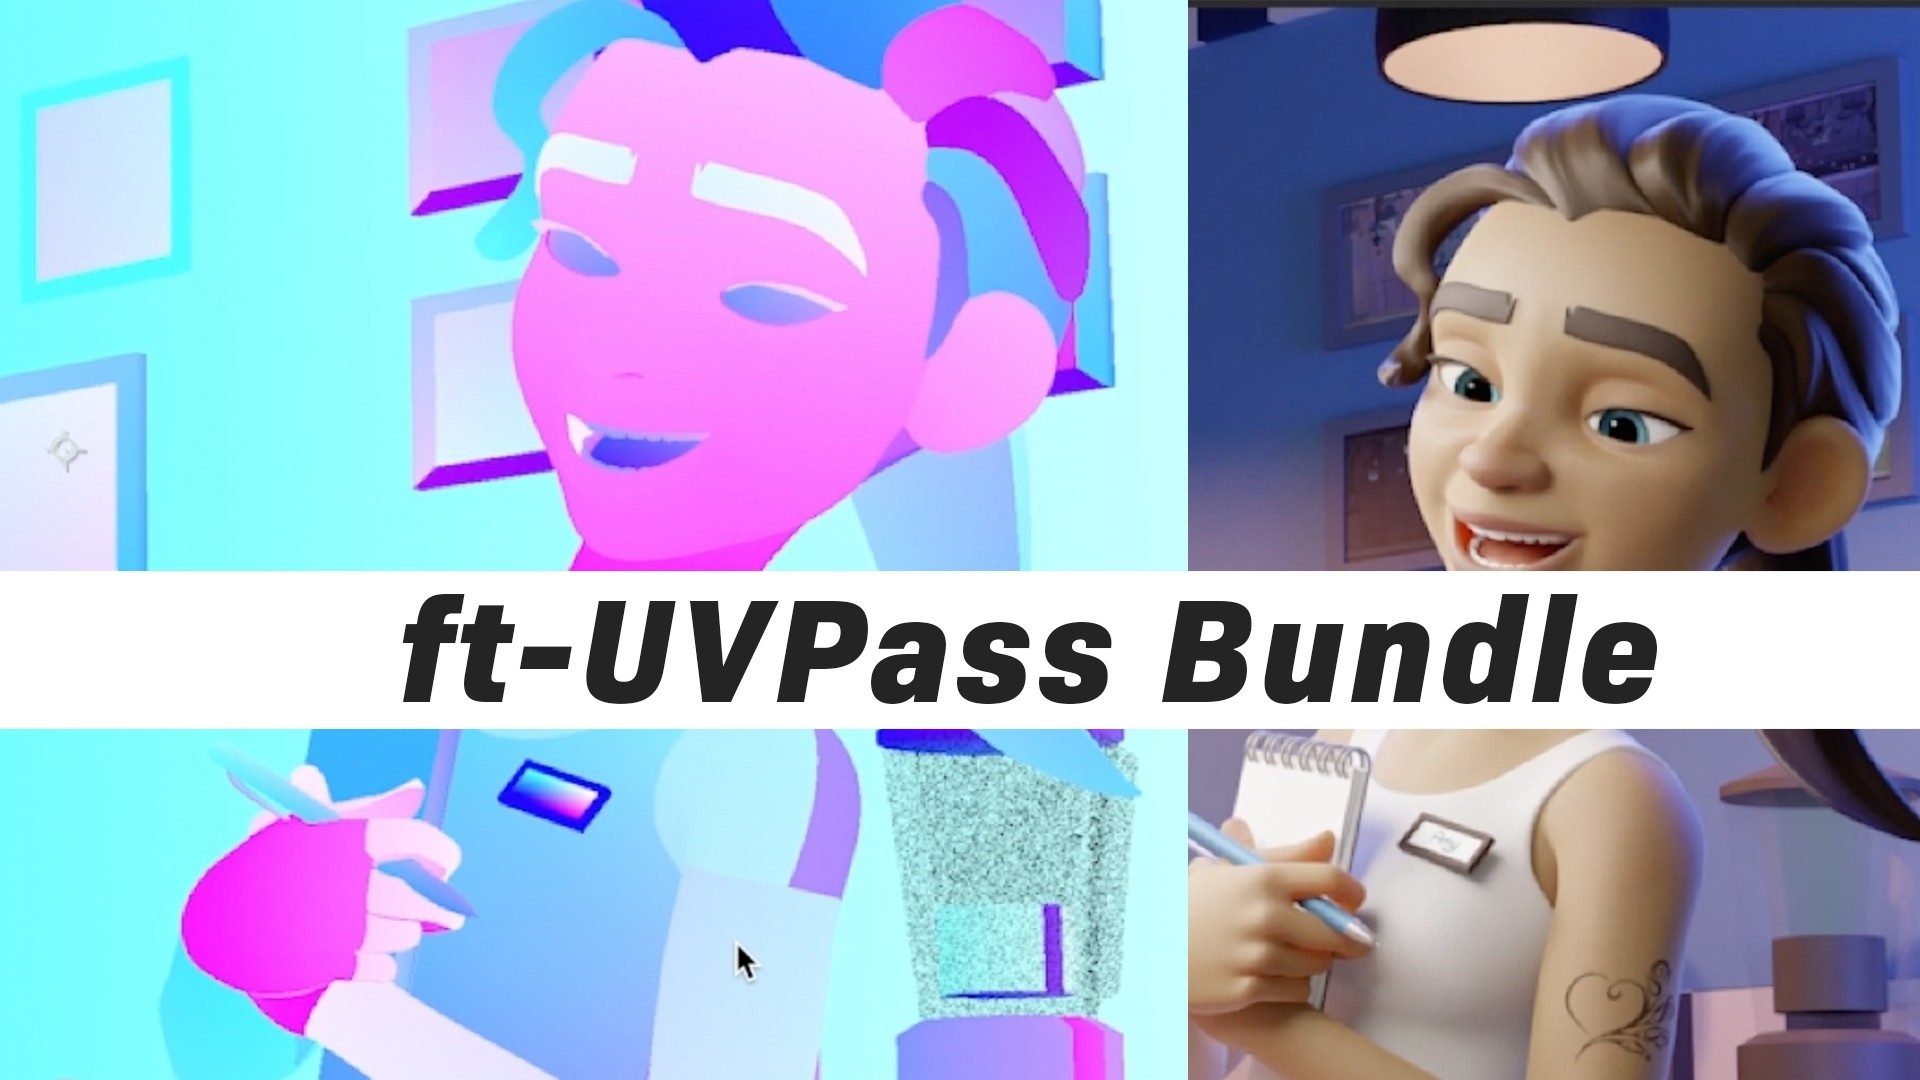 ft-uv pass after effects free download